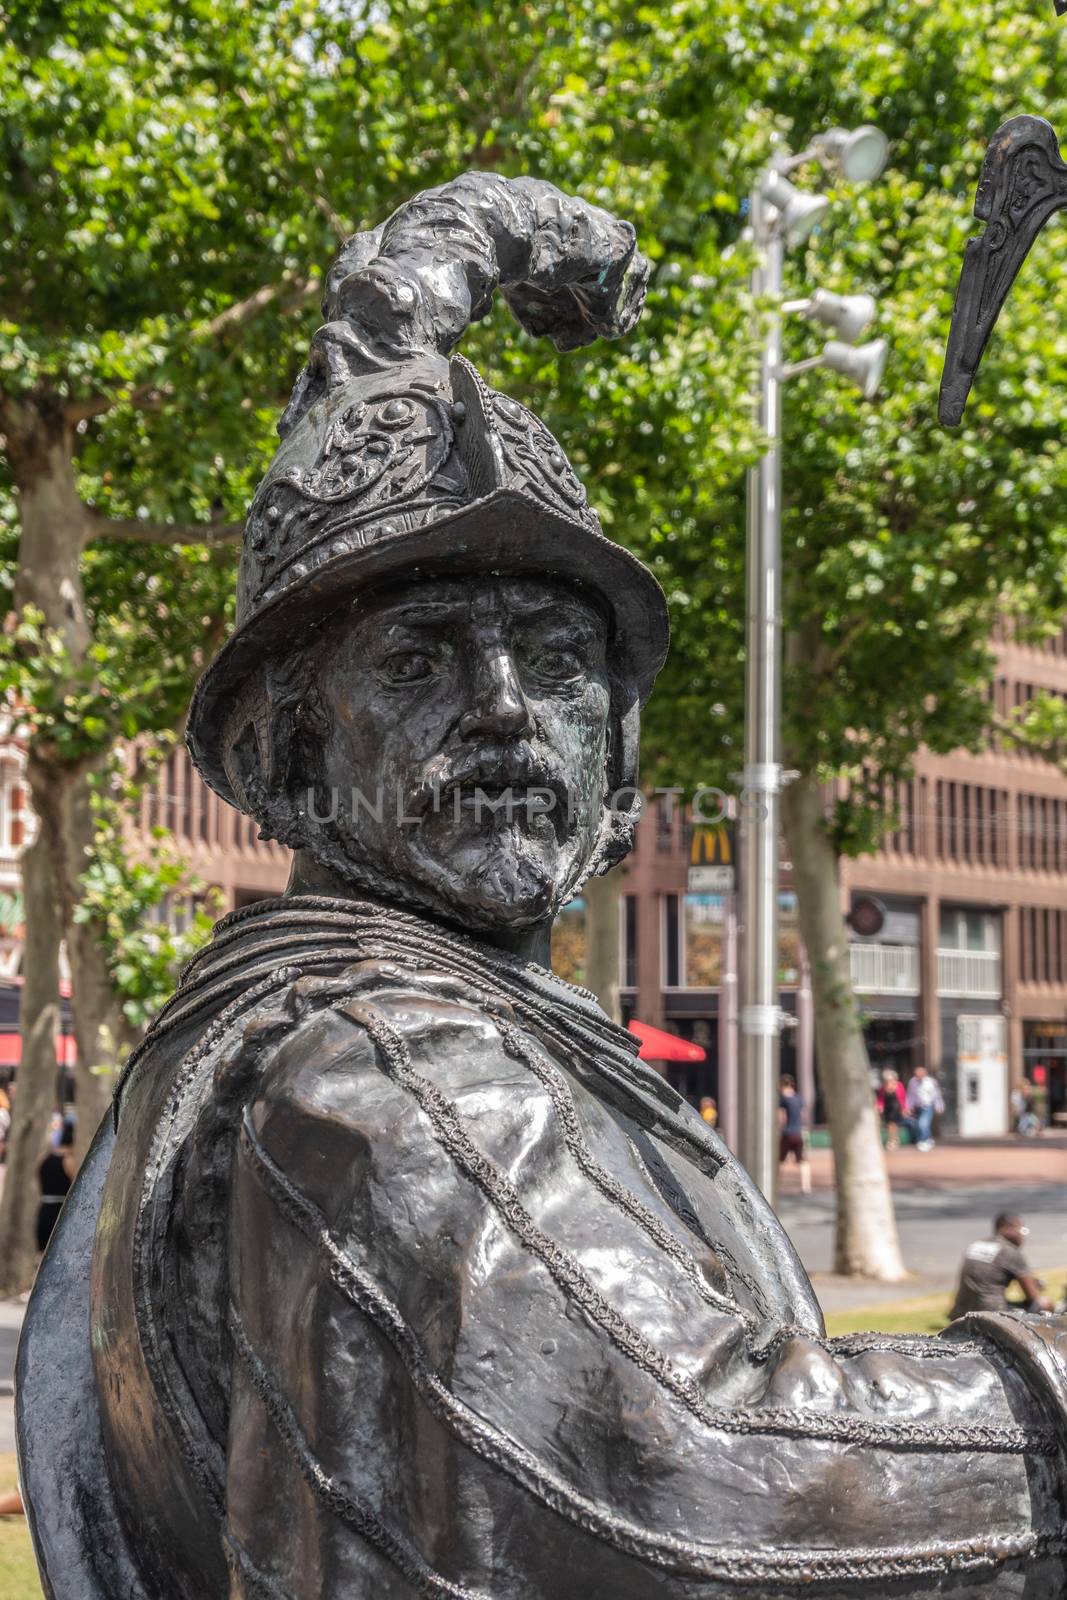 Amsterdam, the Netherlands - July 1, 2019: De Nachtwacht compostion of statues on Rembrandtplein. closeup of chest and head of soldier, warrior statue with feathered helmet.